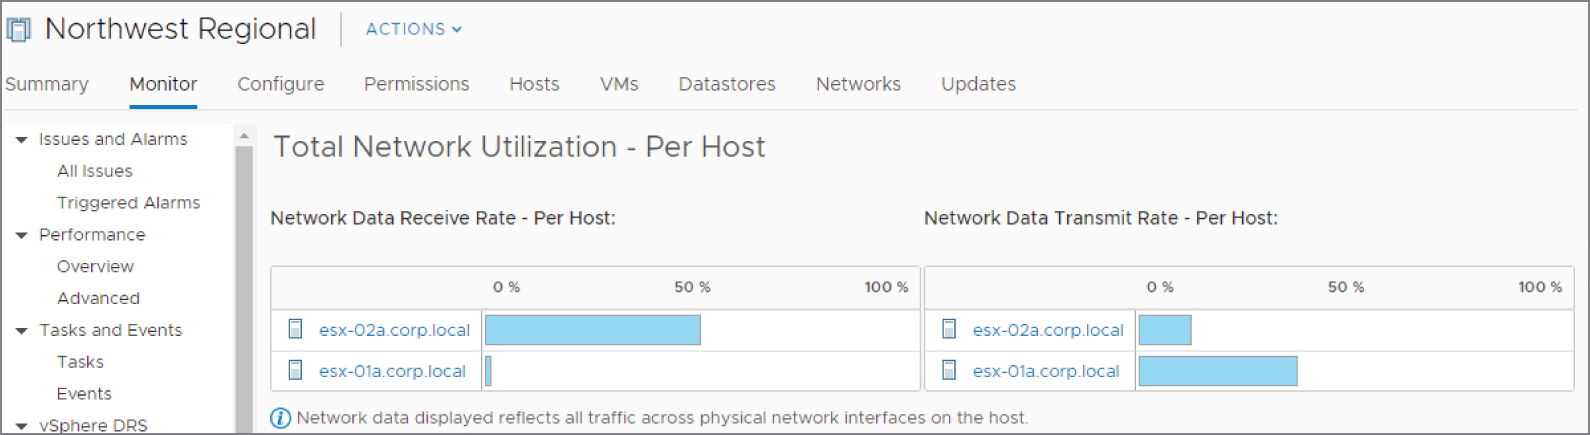 Snapshot of the vSphere DRS Monitor tab showing network utilization for the DRS cluster.